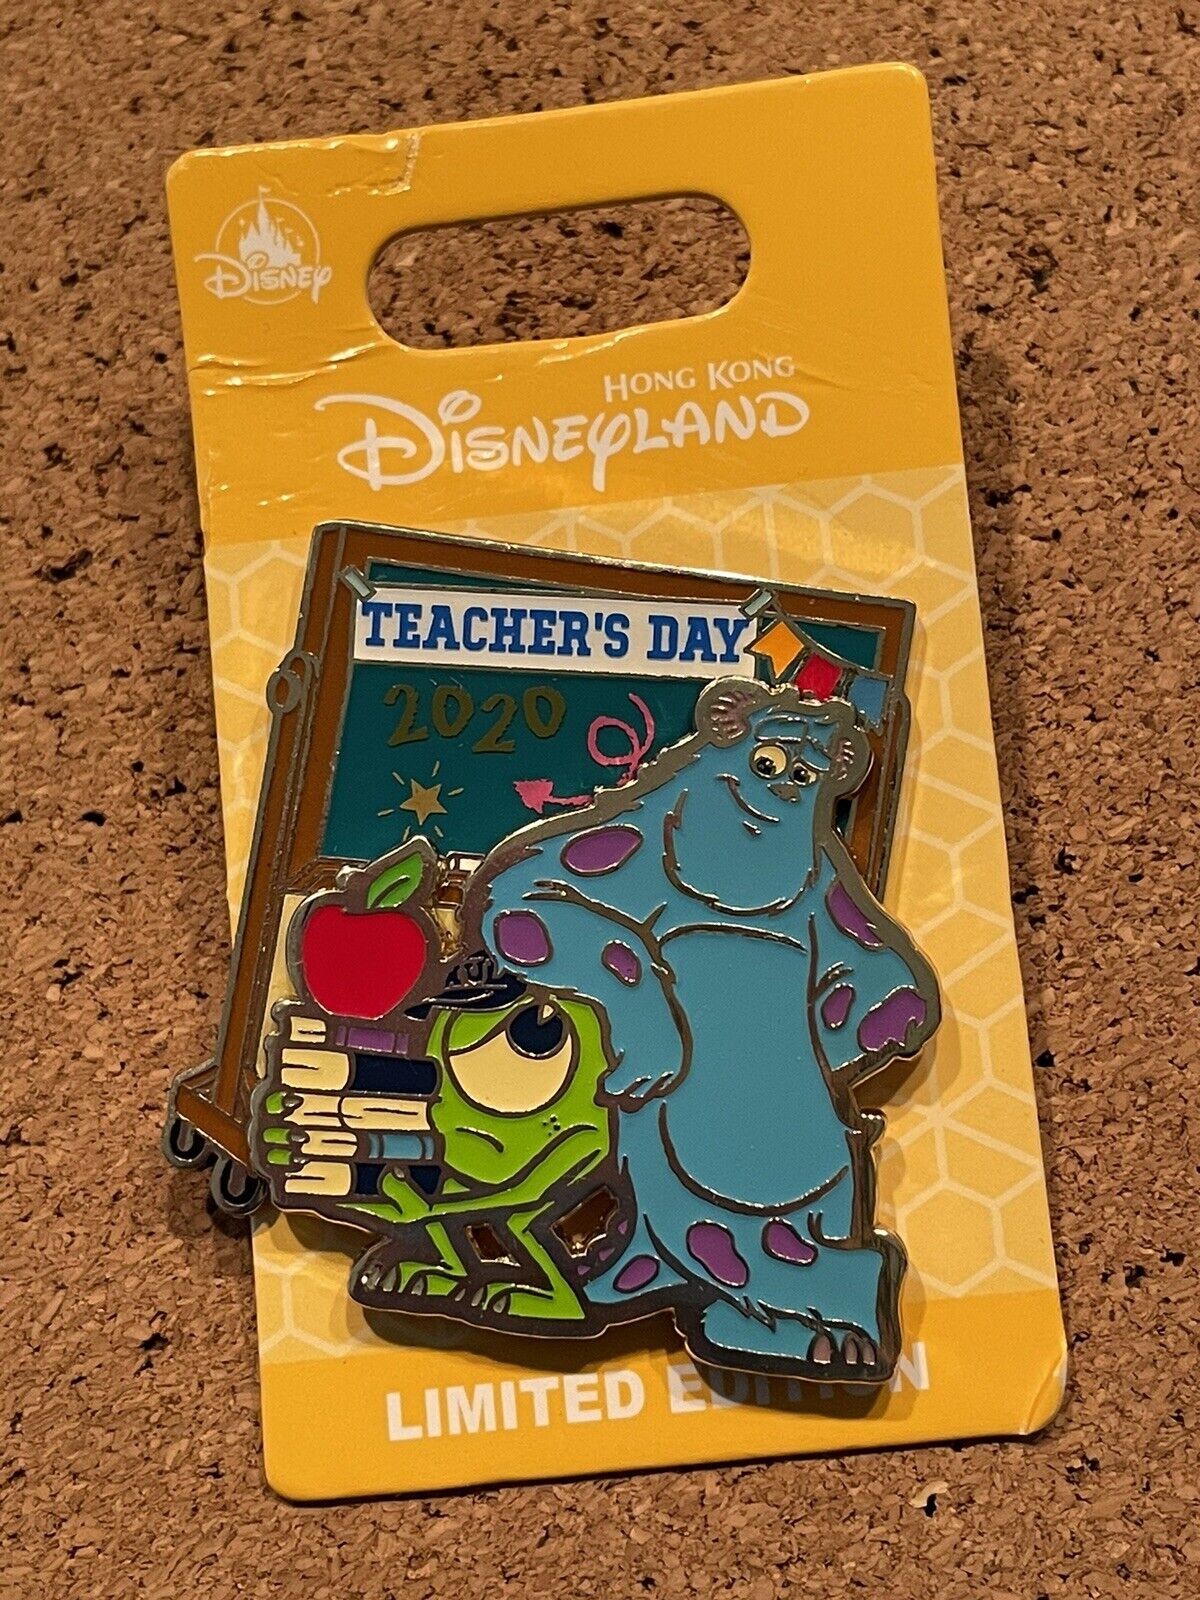 Disney Pins HKDL Hong Kong Teacher’s Day 2020 Monsters Sulley Mike LE600 Pin